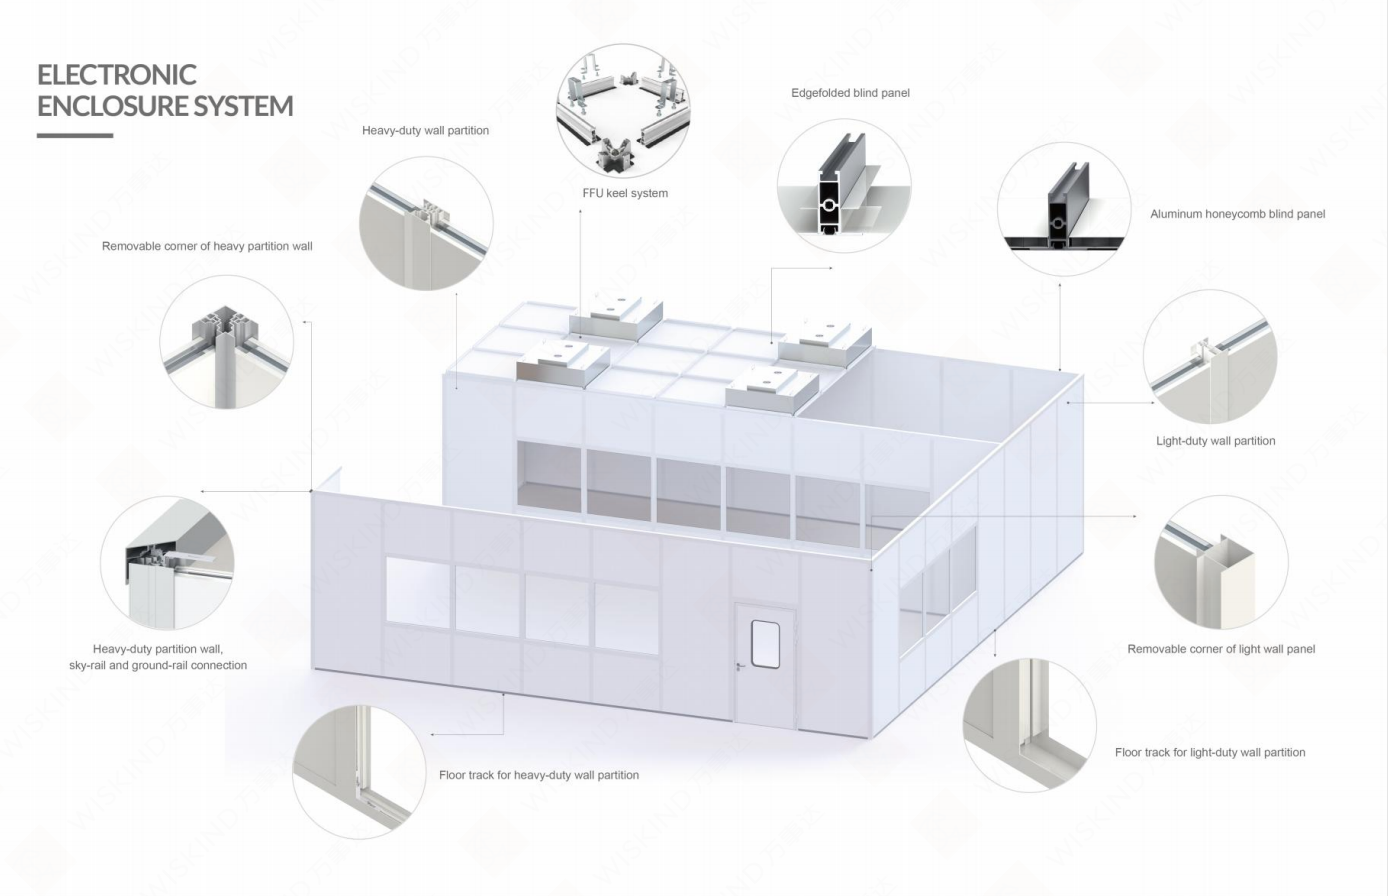 Wiskind electronic cleanroom enclosure system